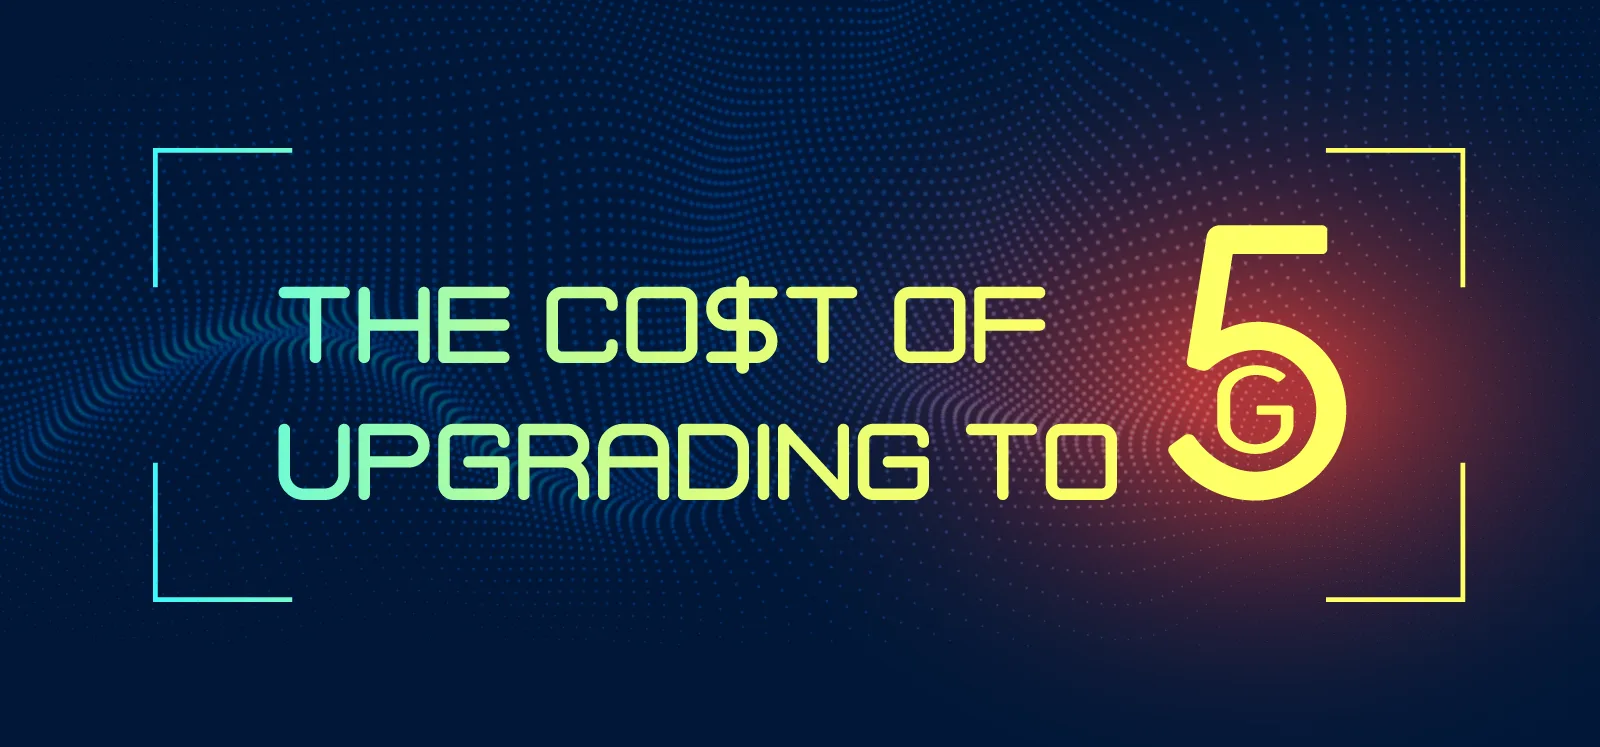 The cost of upgrading to 5G